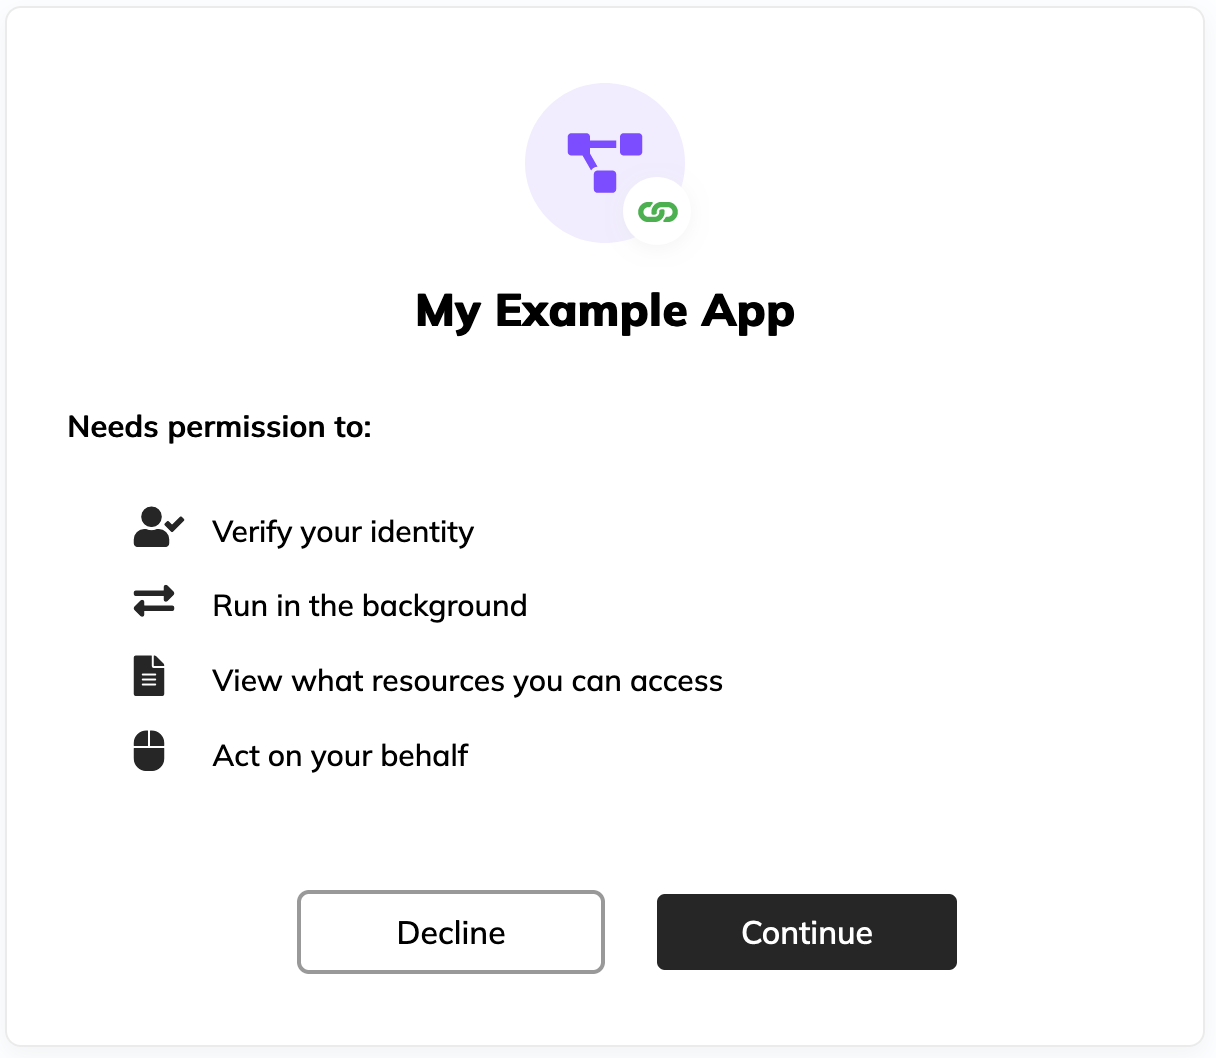 Default Approval Page for the :guilabel:`My Example App`.